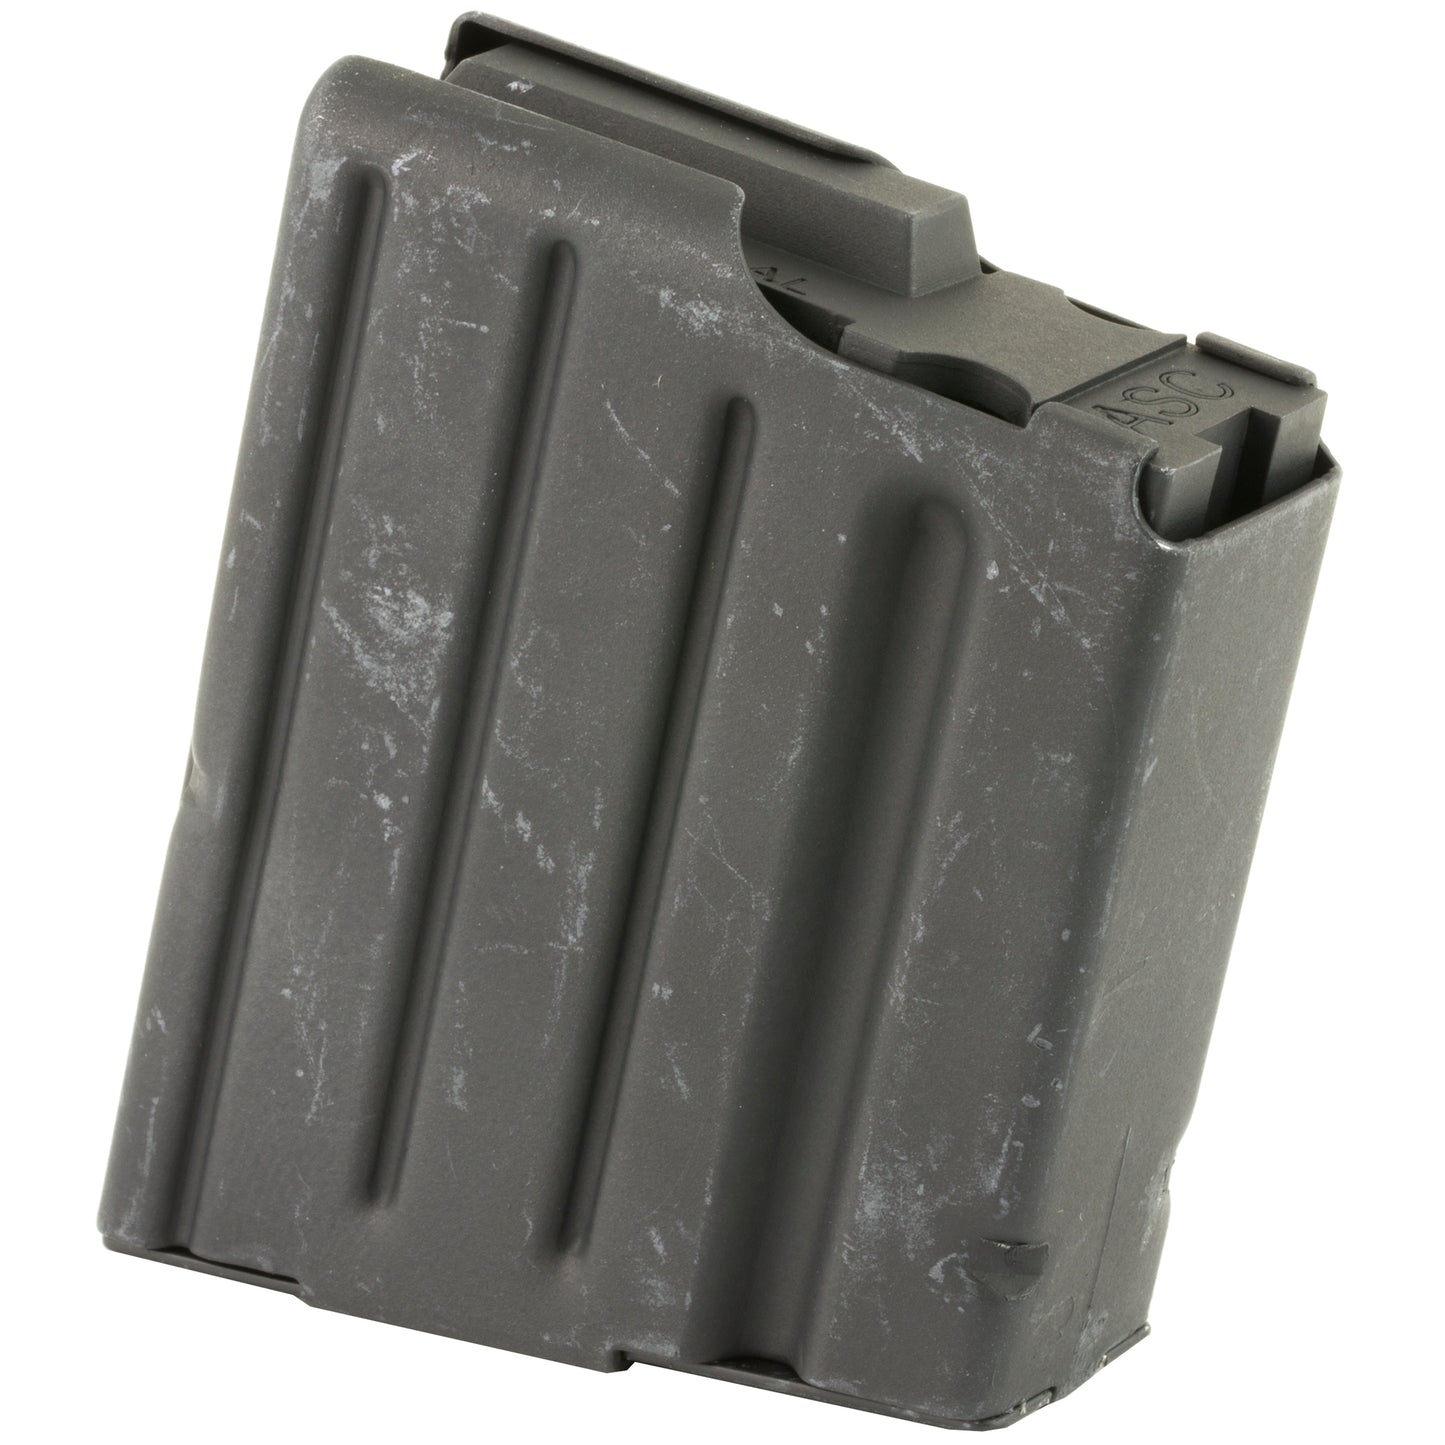 Smith & Wesson Magazine 308 Winchester 5 Rounds Fits M&P 10 Steel 432180000 - California Shooting Supplies